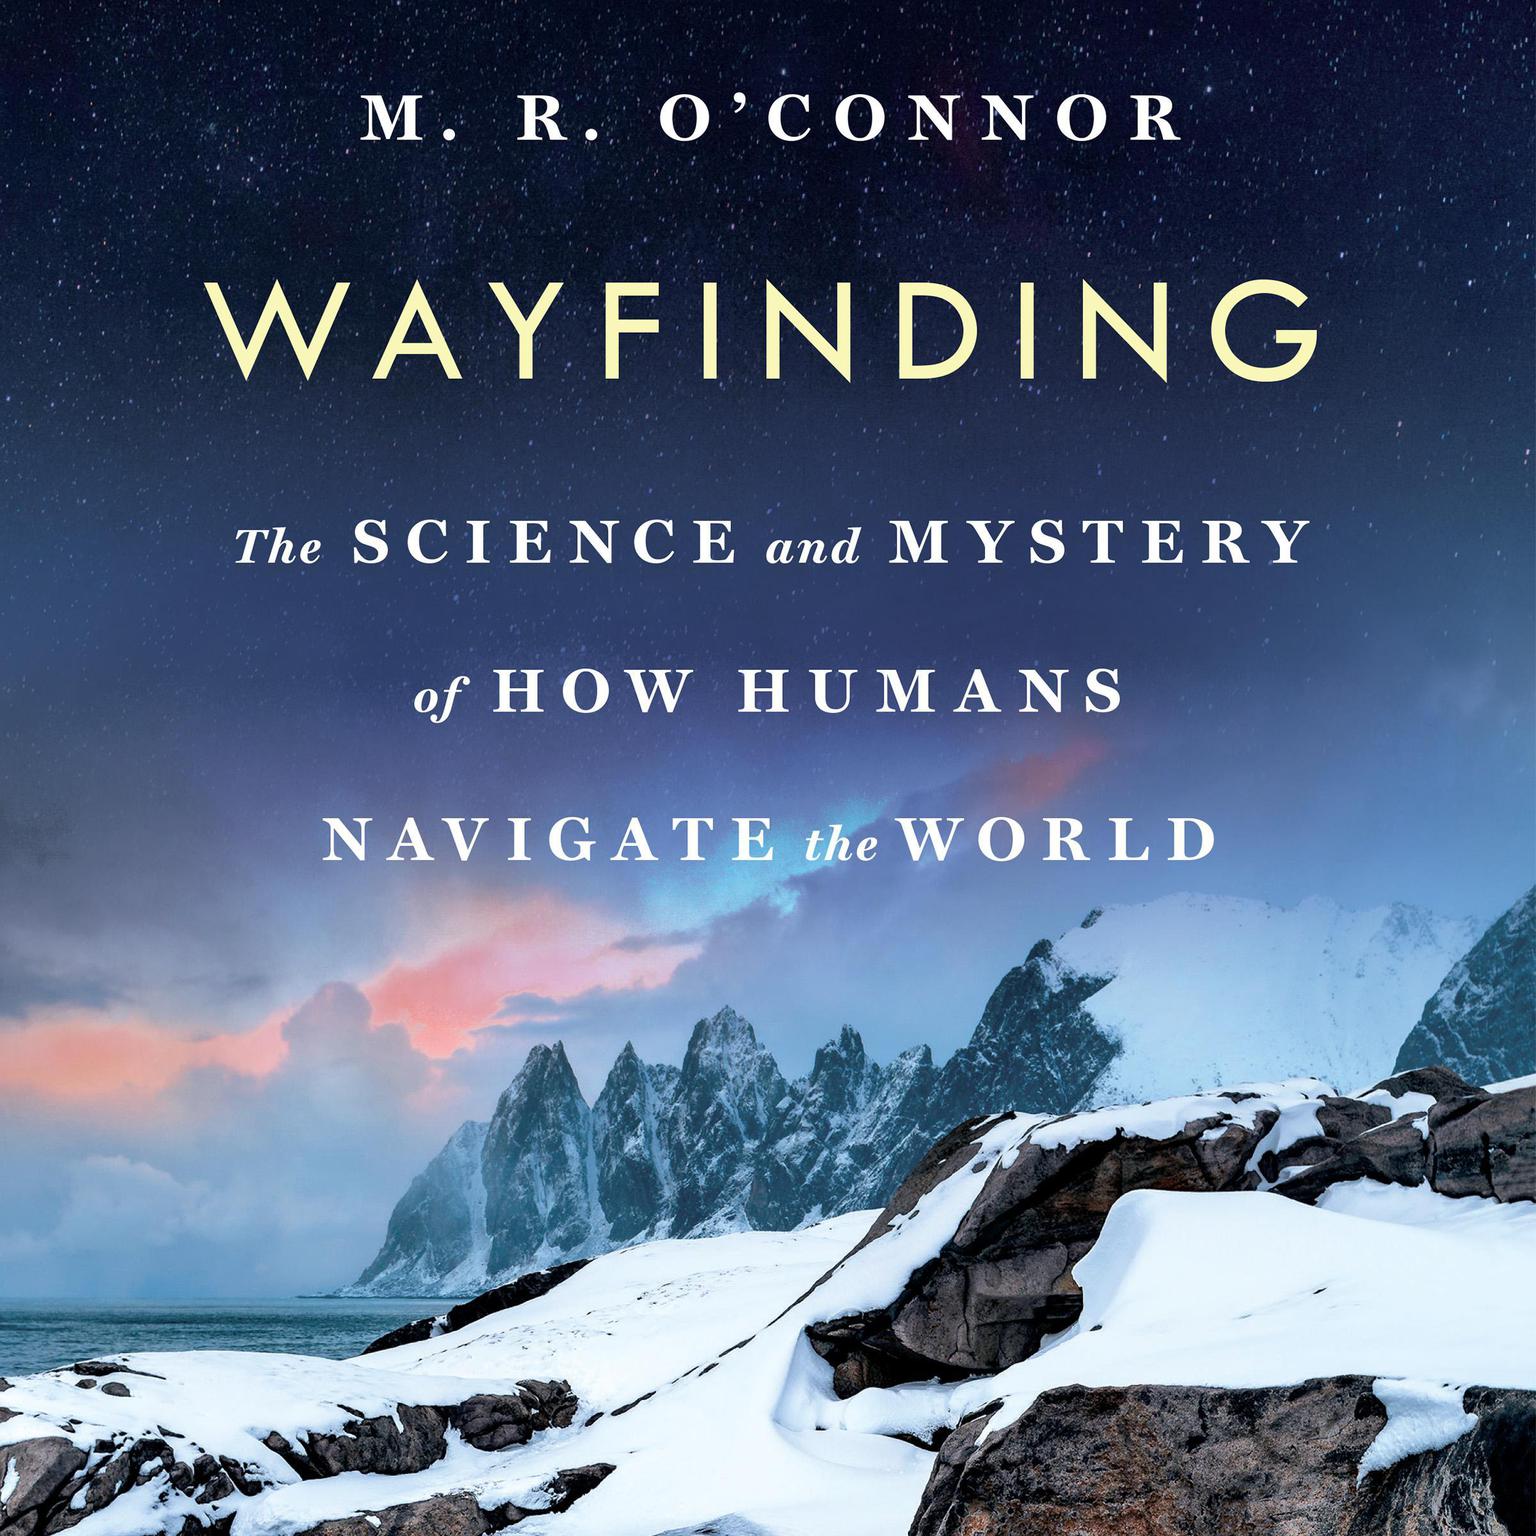 Wayfinding: The Science and Mystery of How Humans Navigate the World Audiobook, by M. R. O'Connor